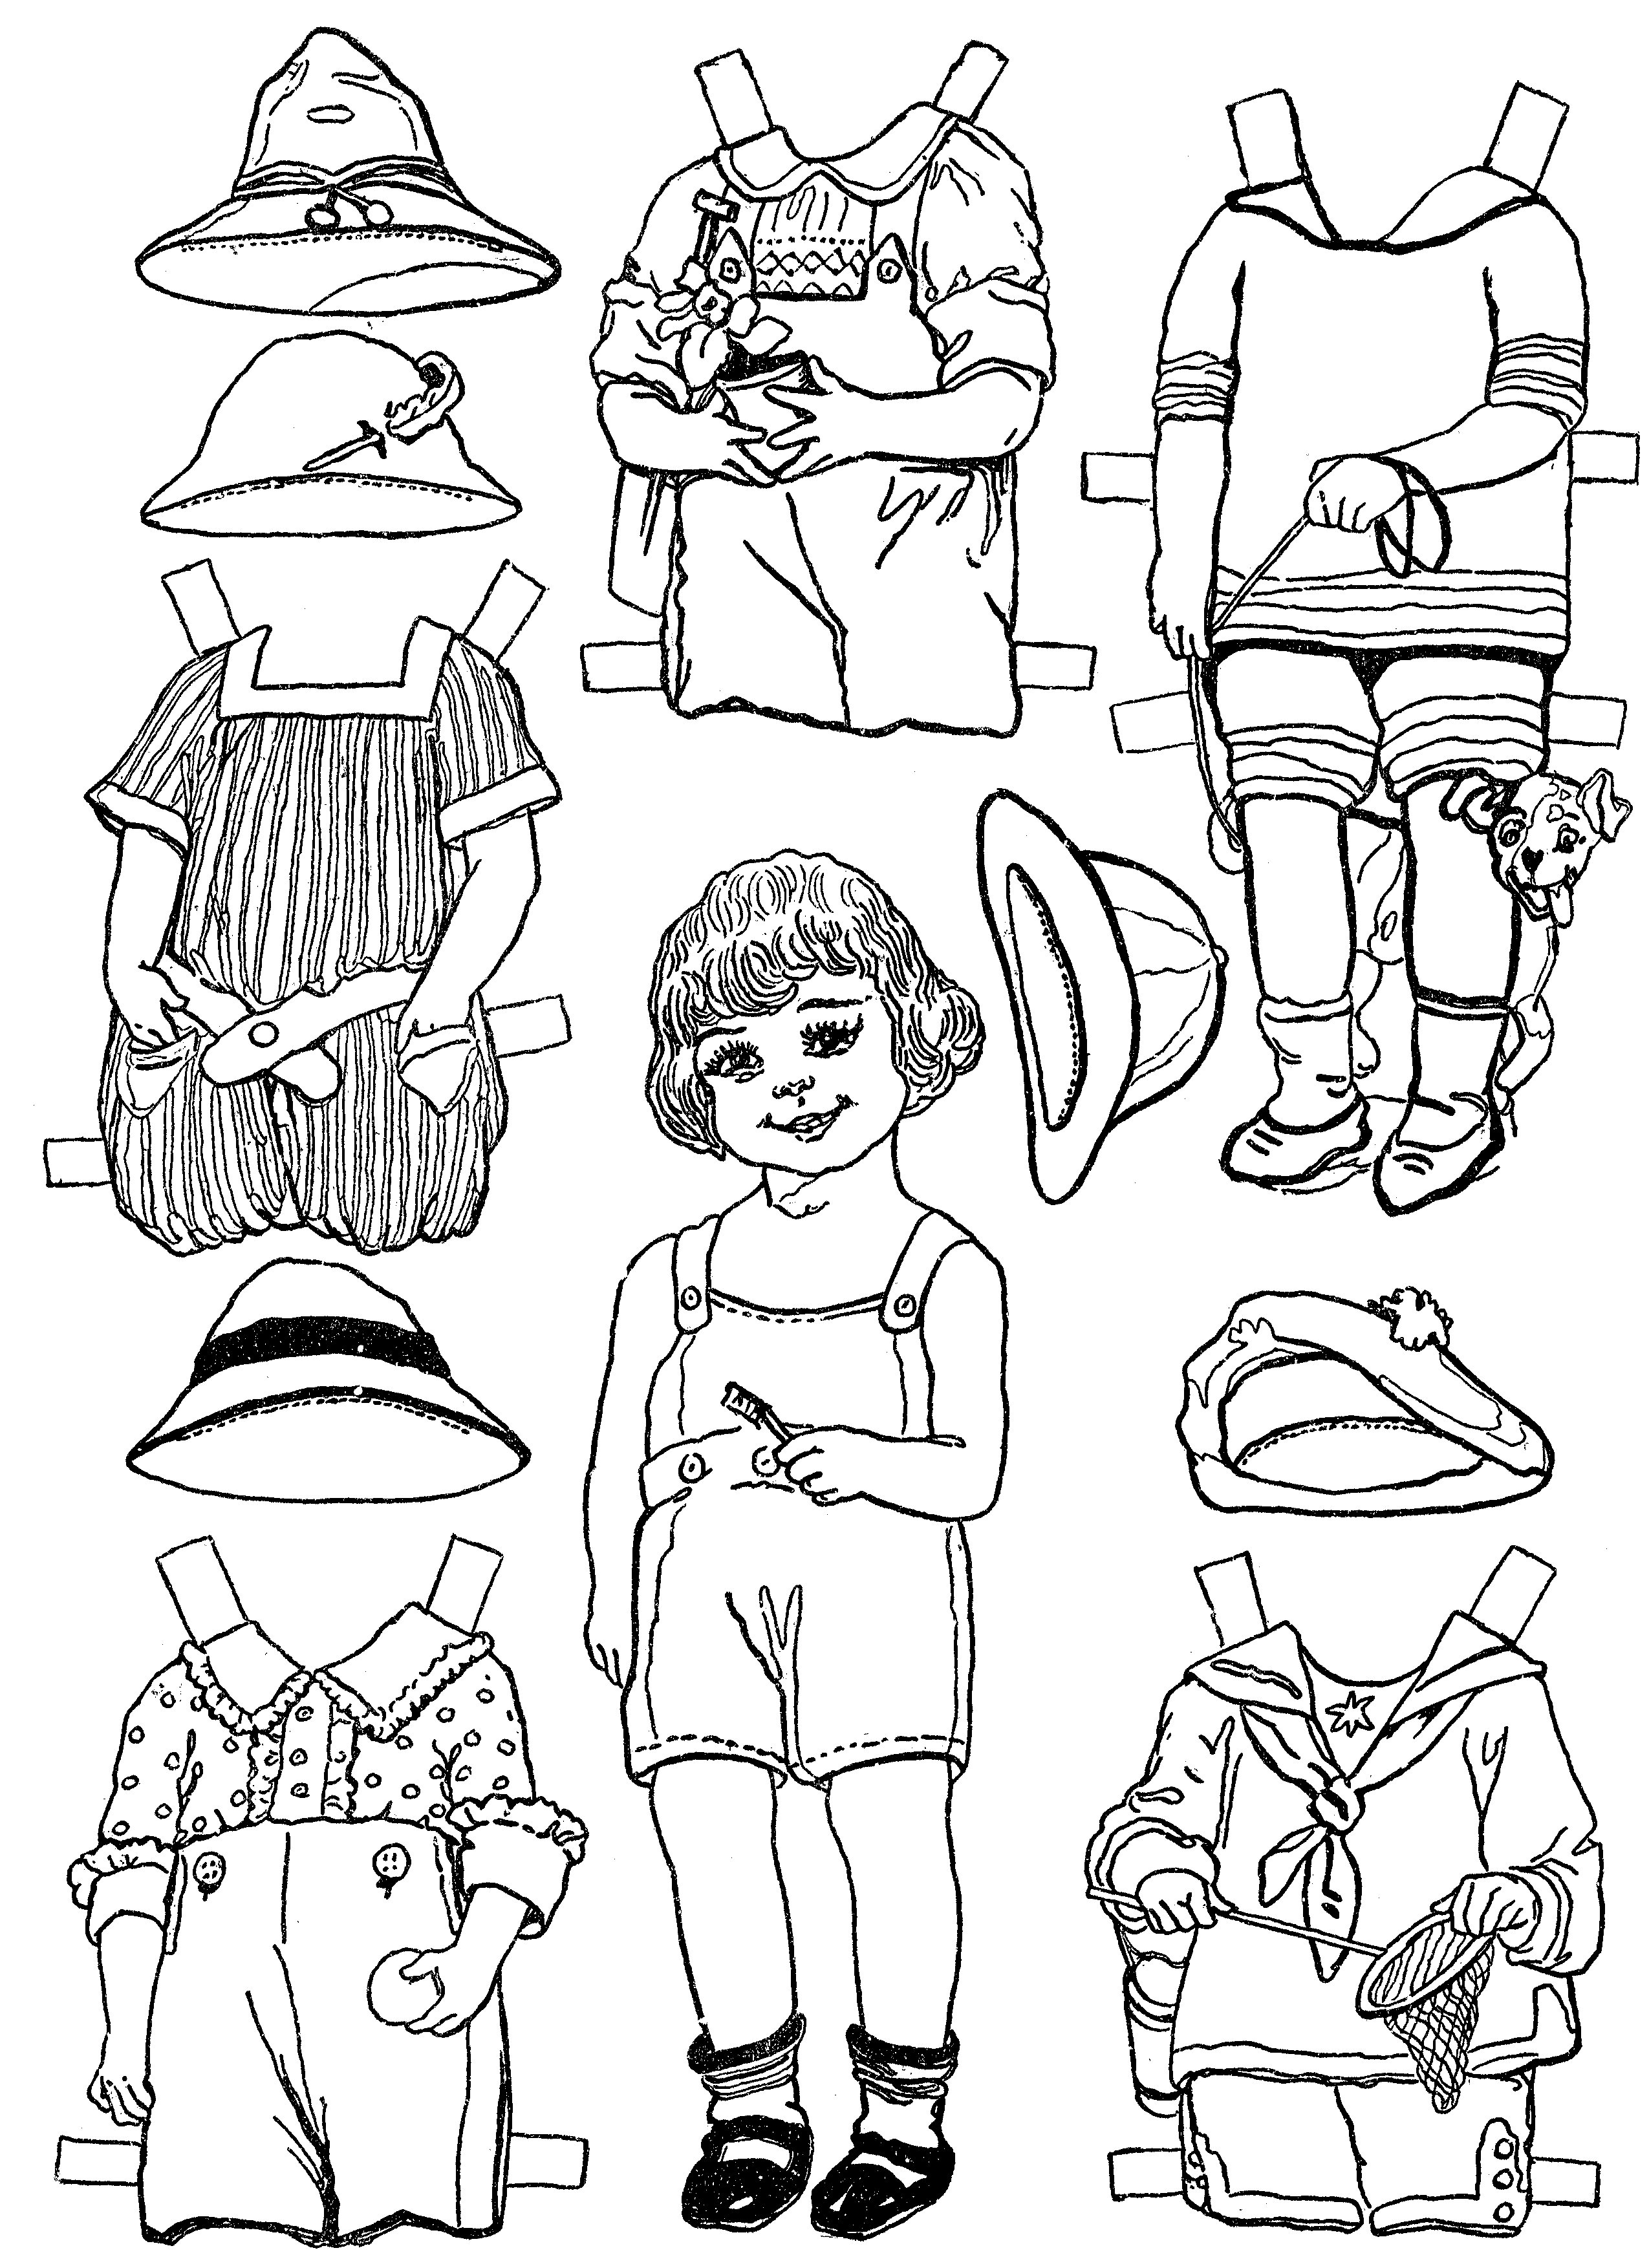 Paper Dolls And Paper Doll Dresses – Printable From Kid Fun – - Printable Paper Dolls To Color Free